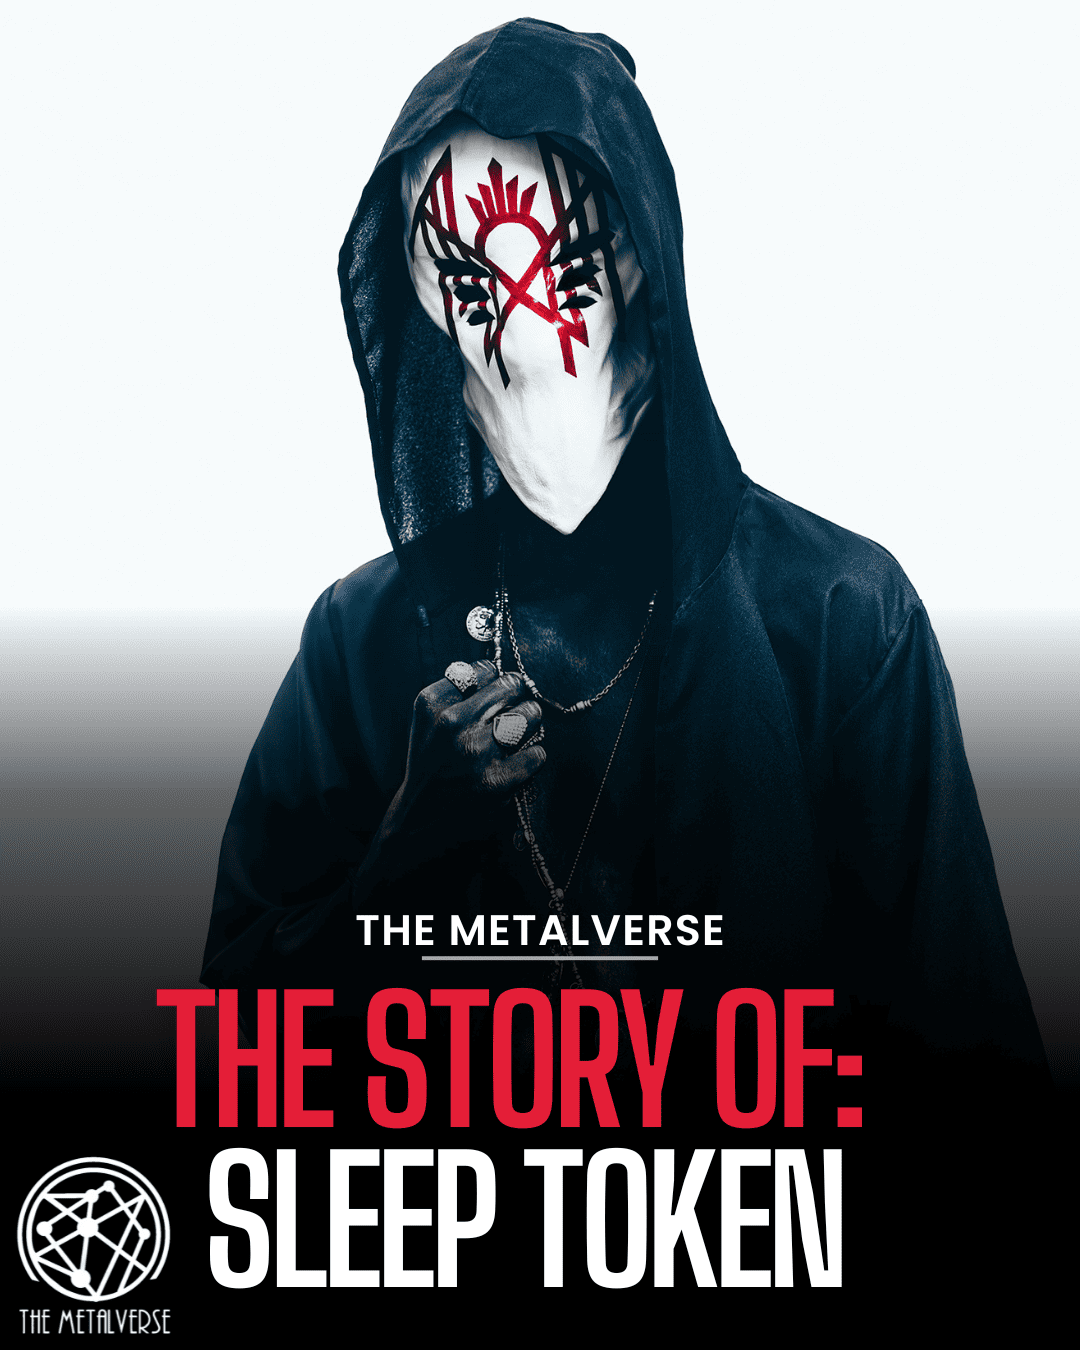 Sleep Token: The Mysterious Band Blending Metal With Mainstream Music